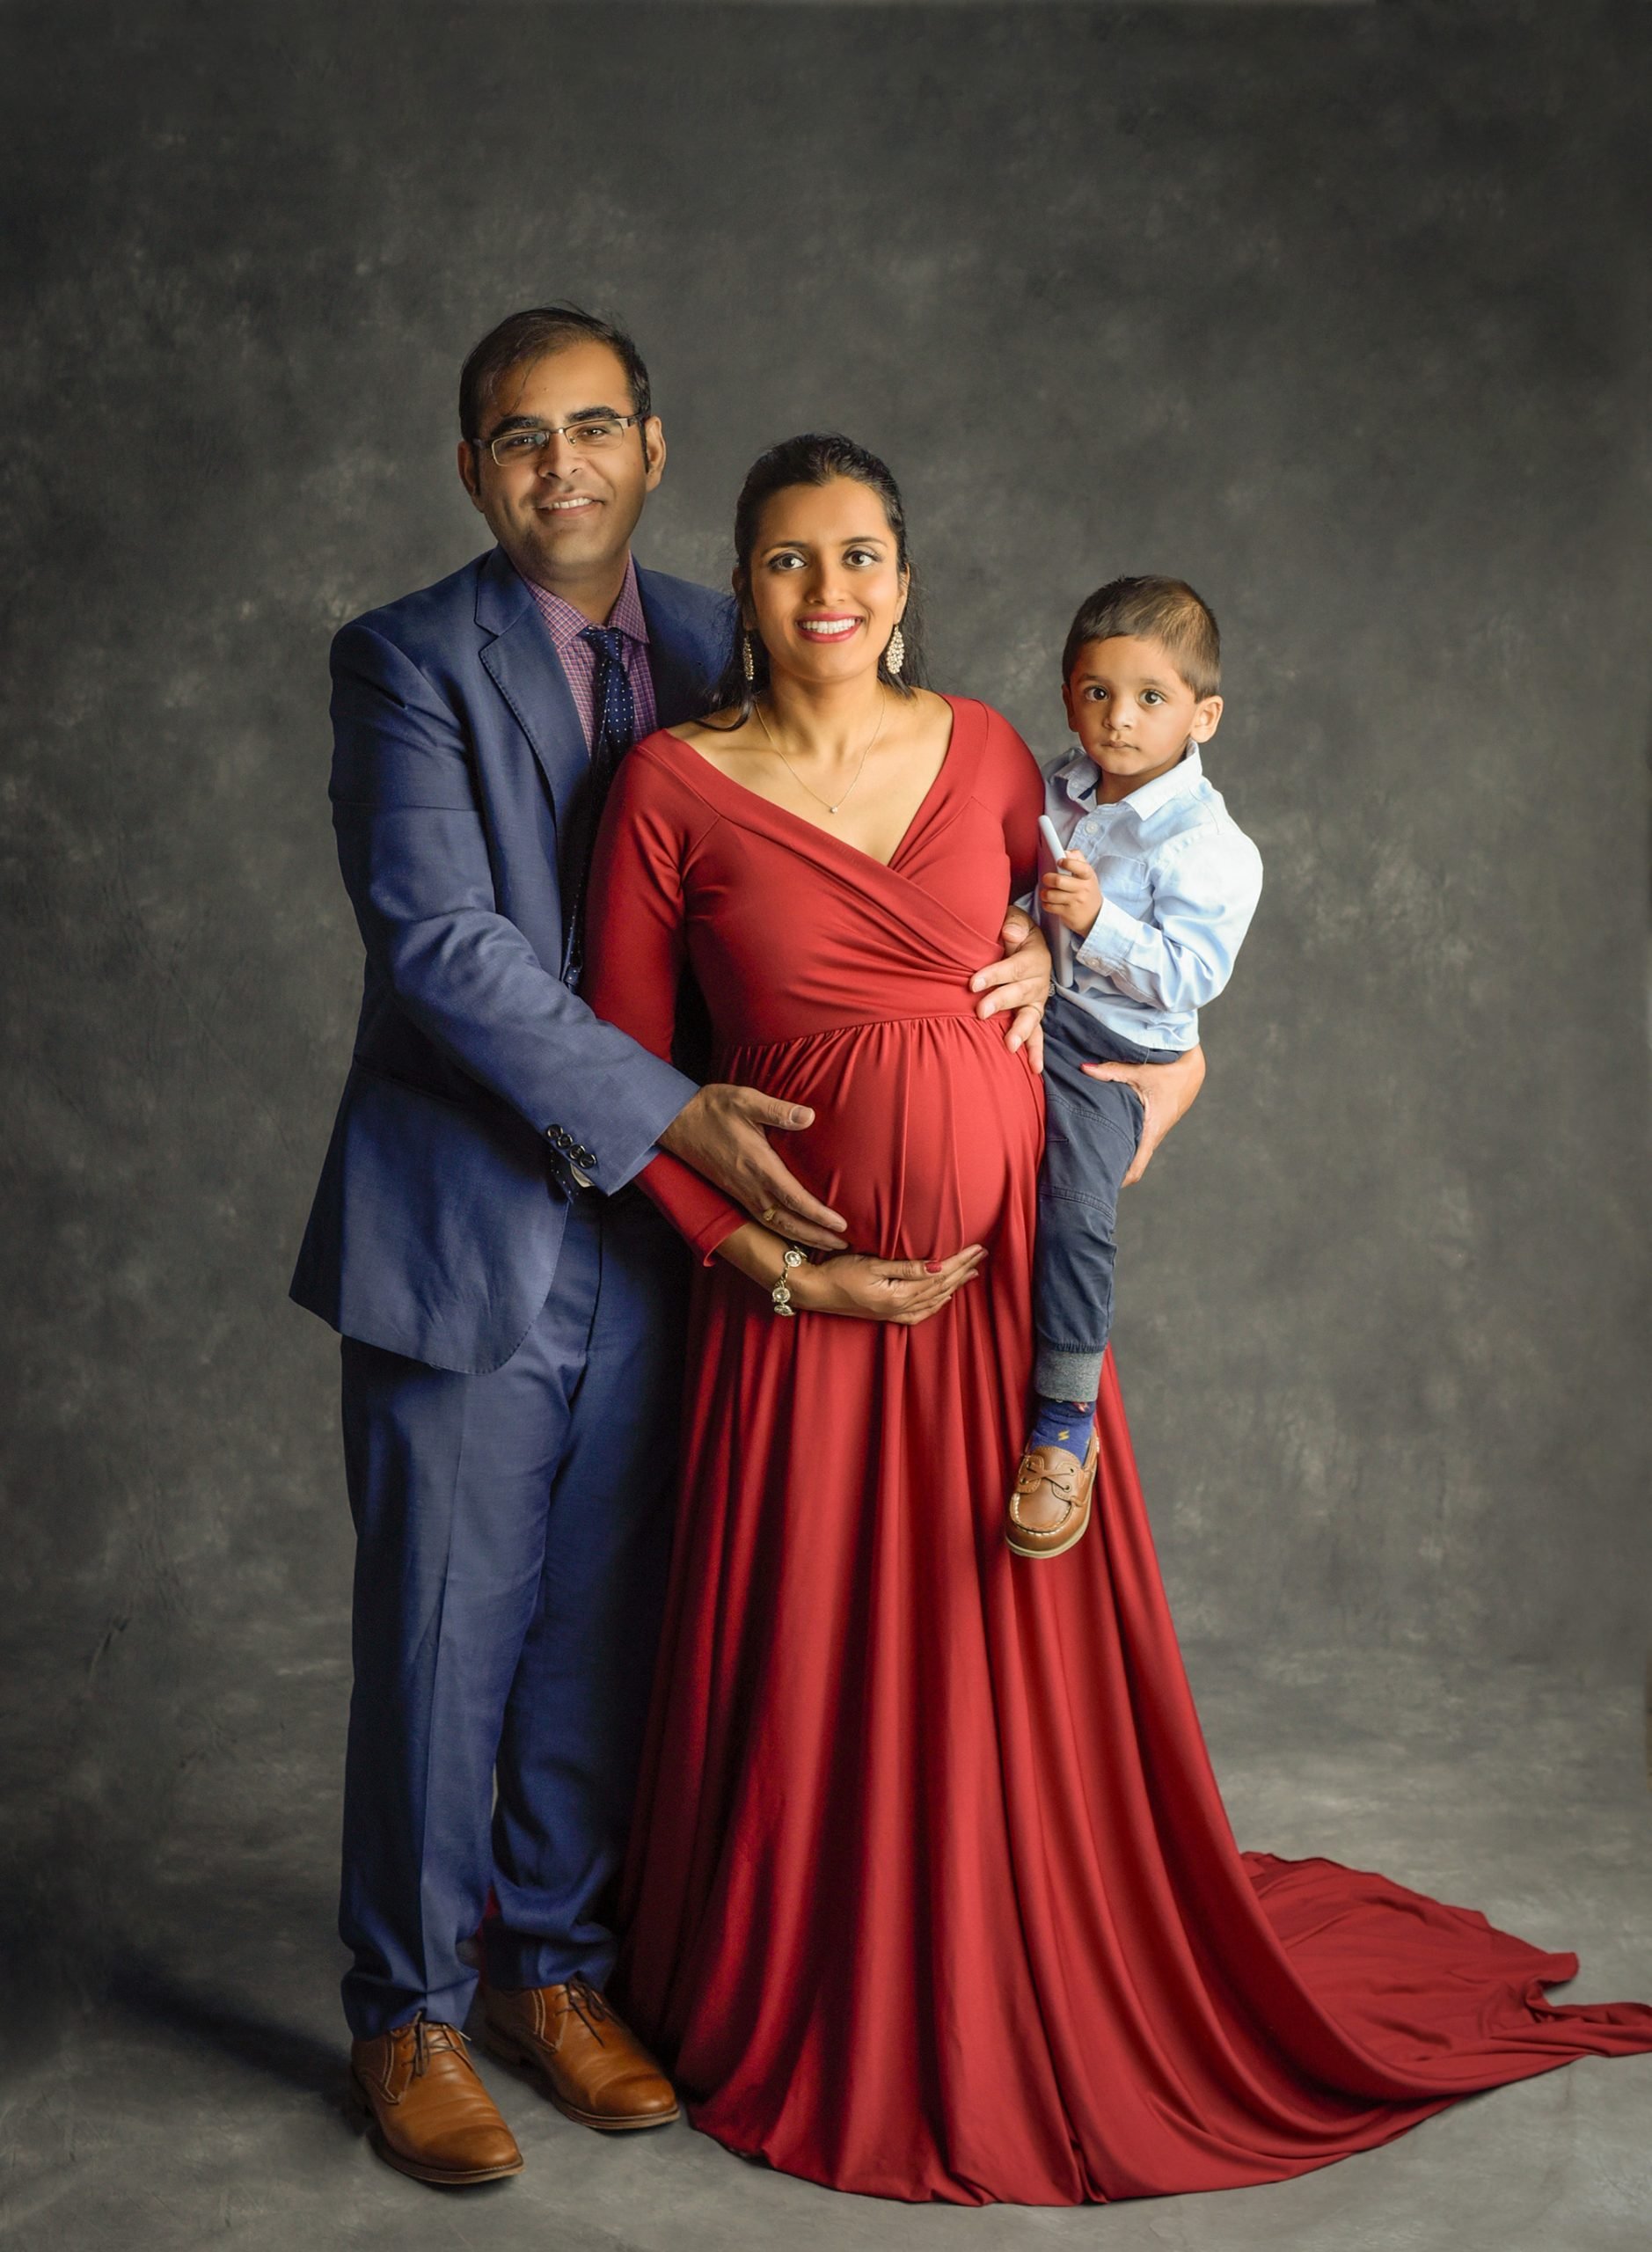 Professional Maternity Newborn Photographer pregnant woman in red maternity dress posing with son and husband